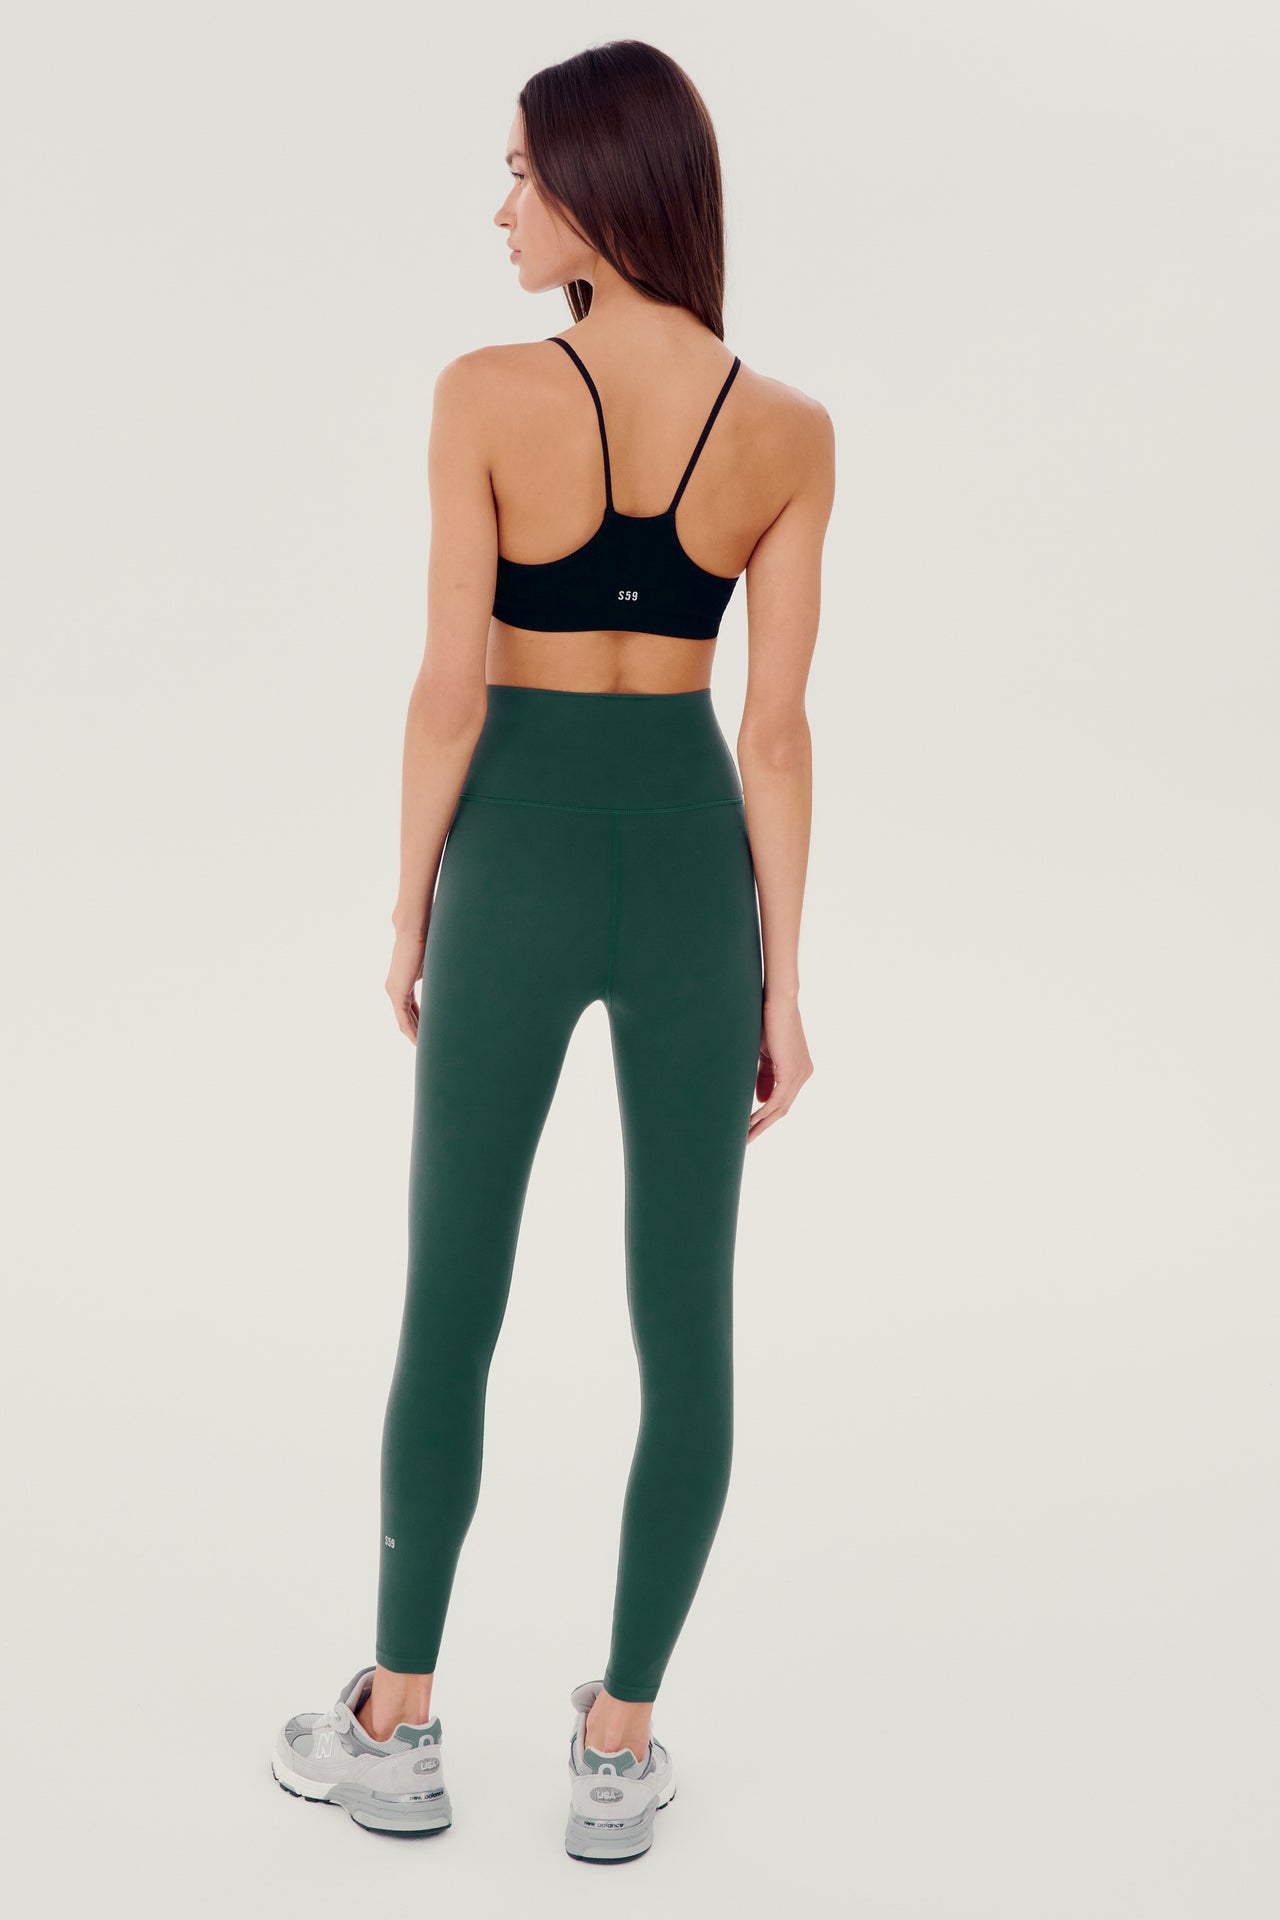 Full back view of girl wearing dark green leggings right above the ankle with black sports bra and grey shoes